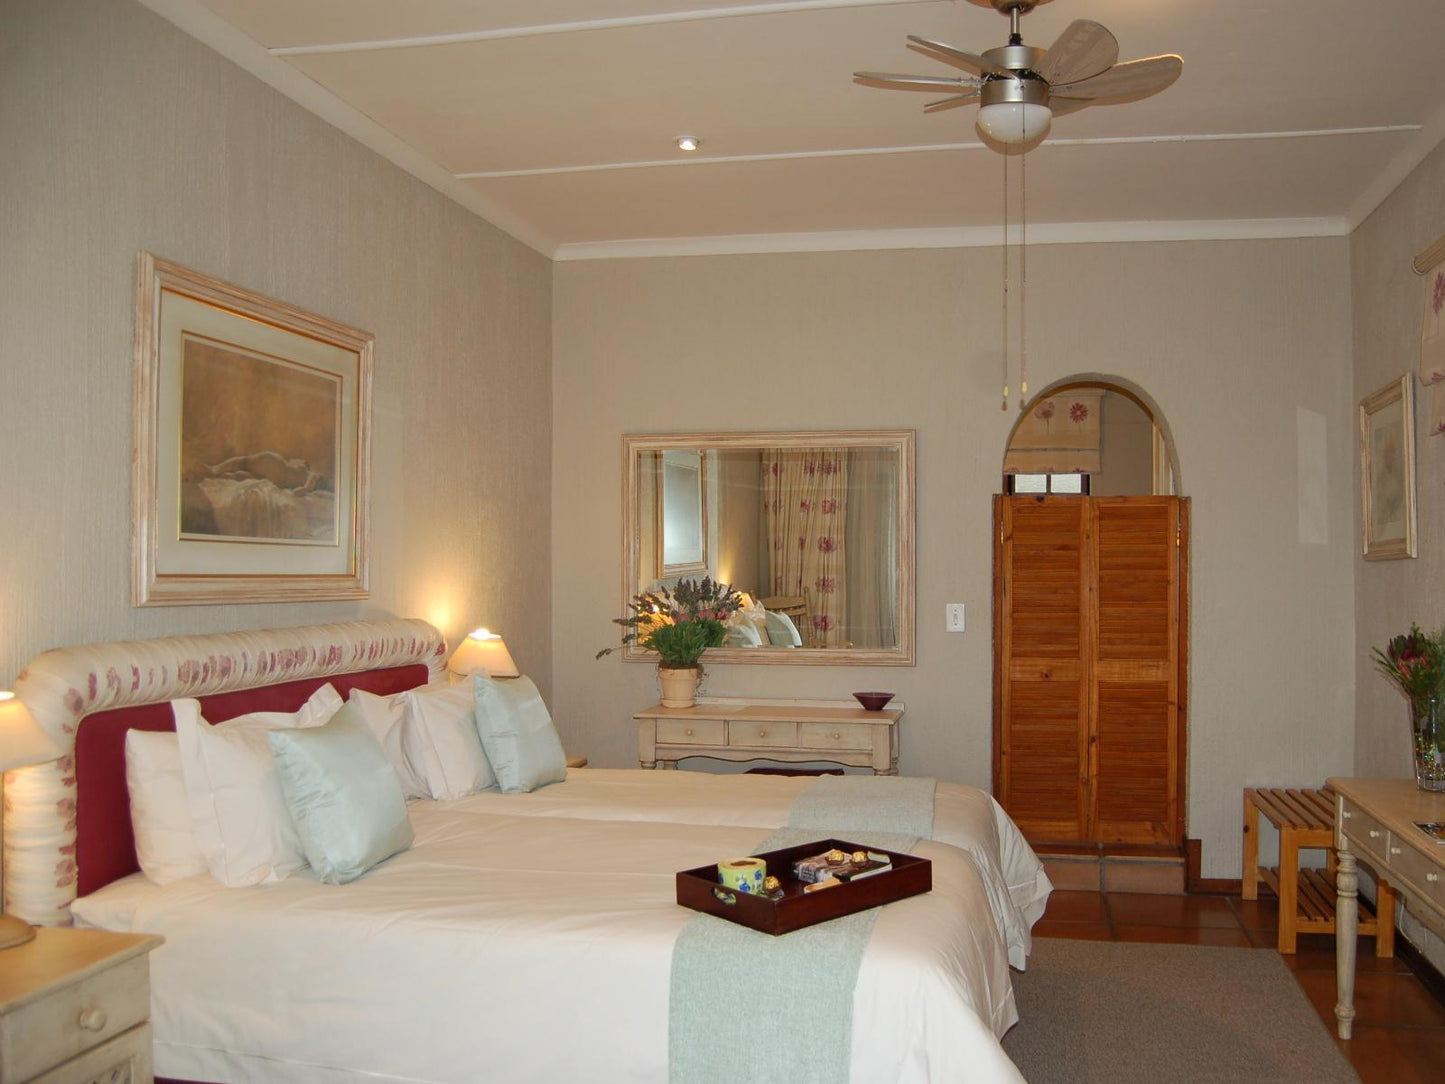 Standard Twin Room @ Chestnut Country Lodge